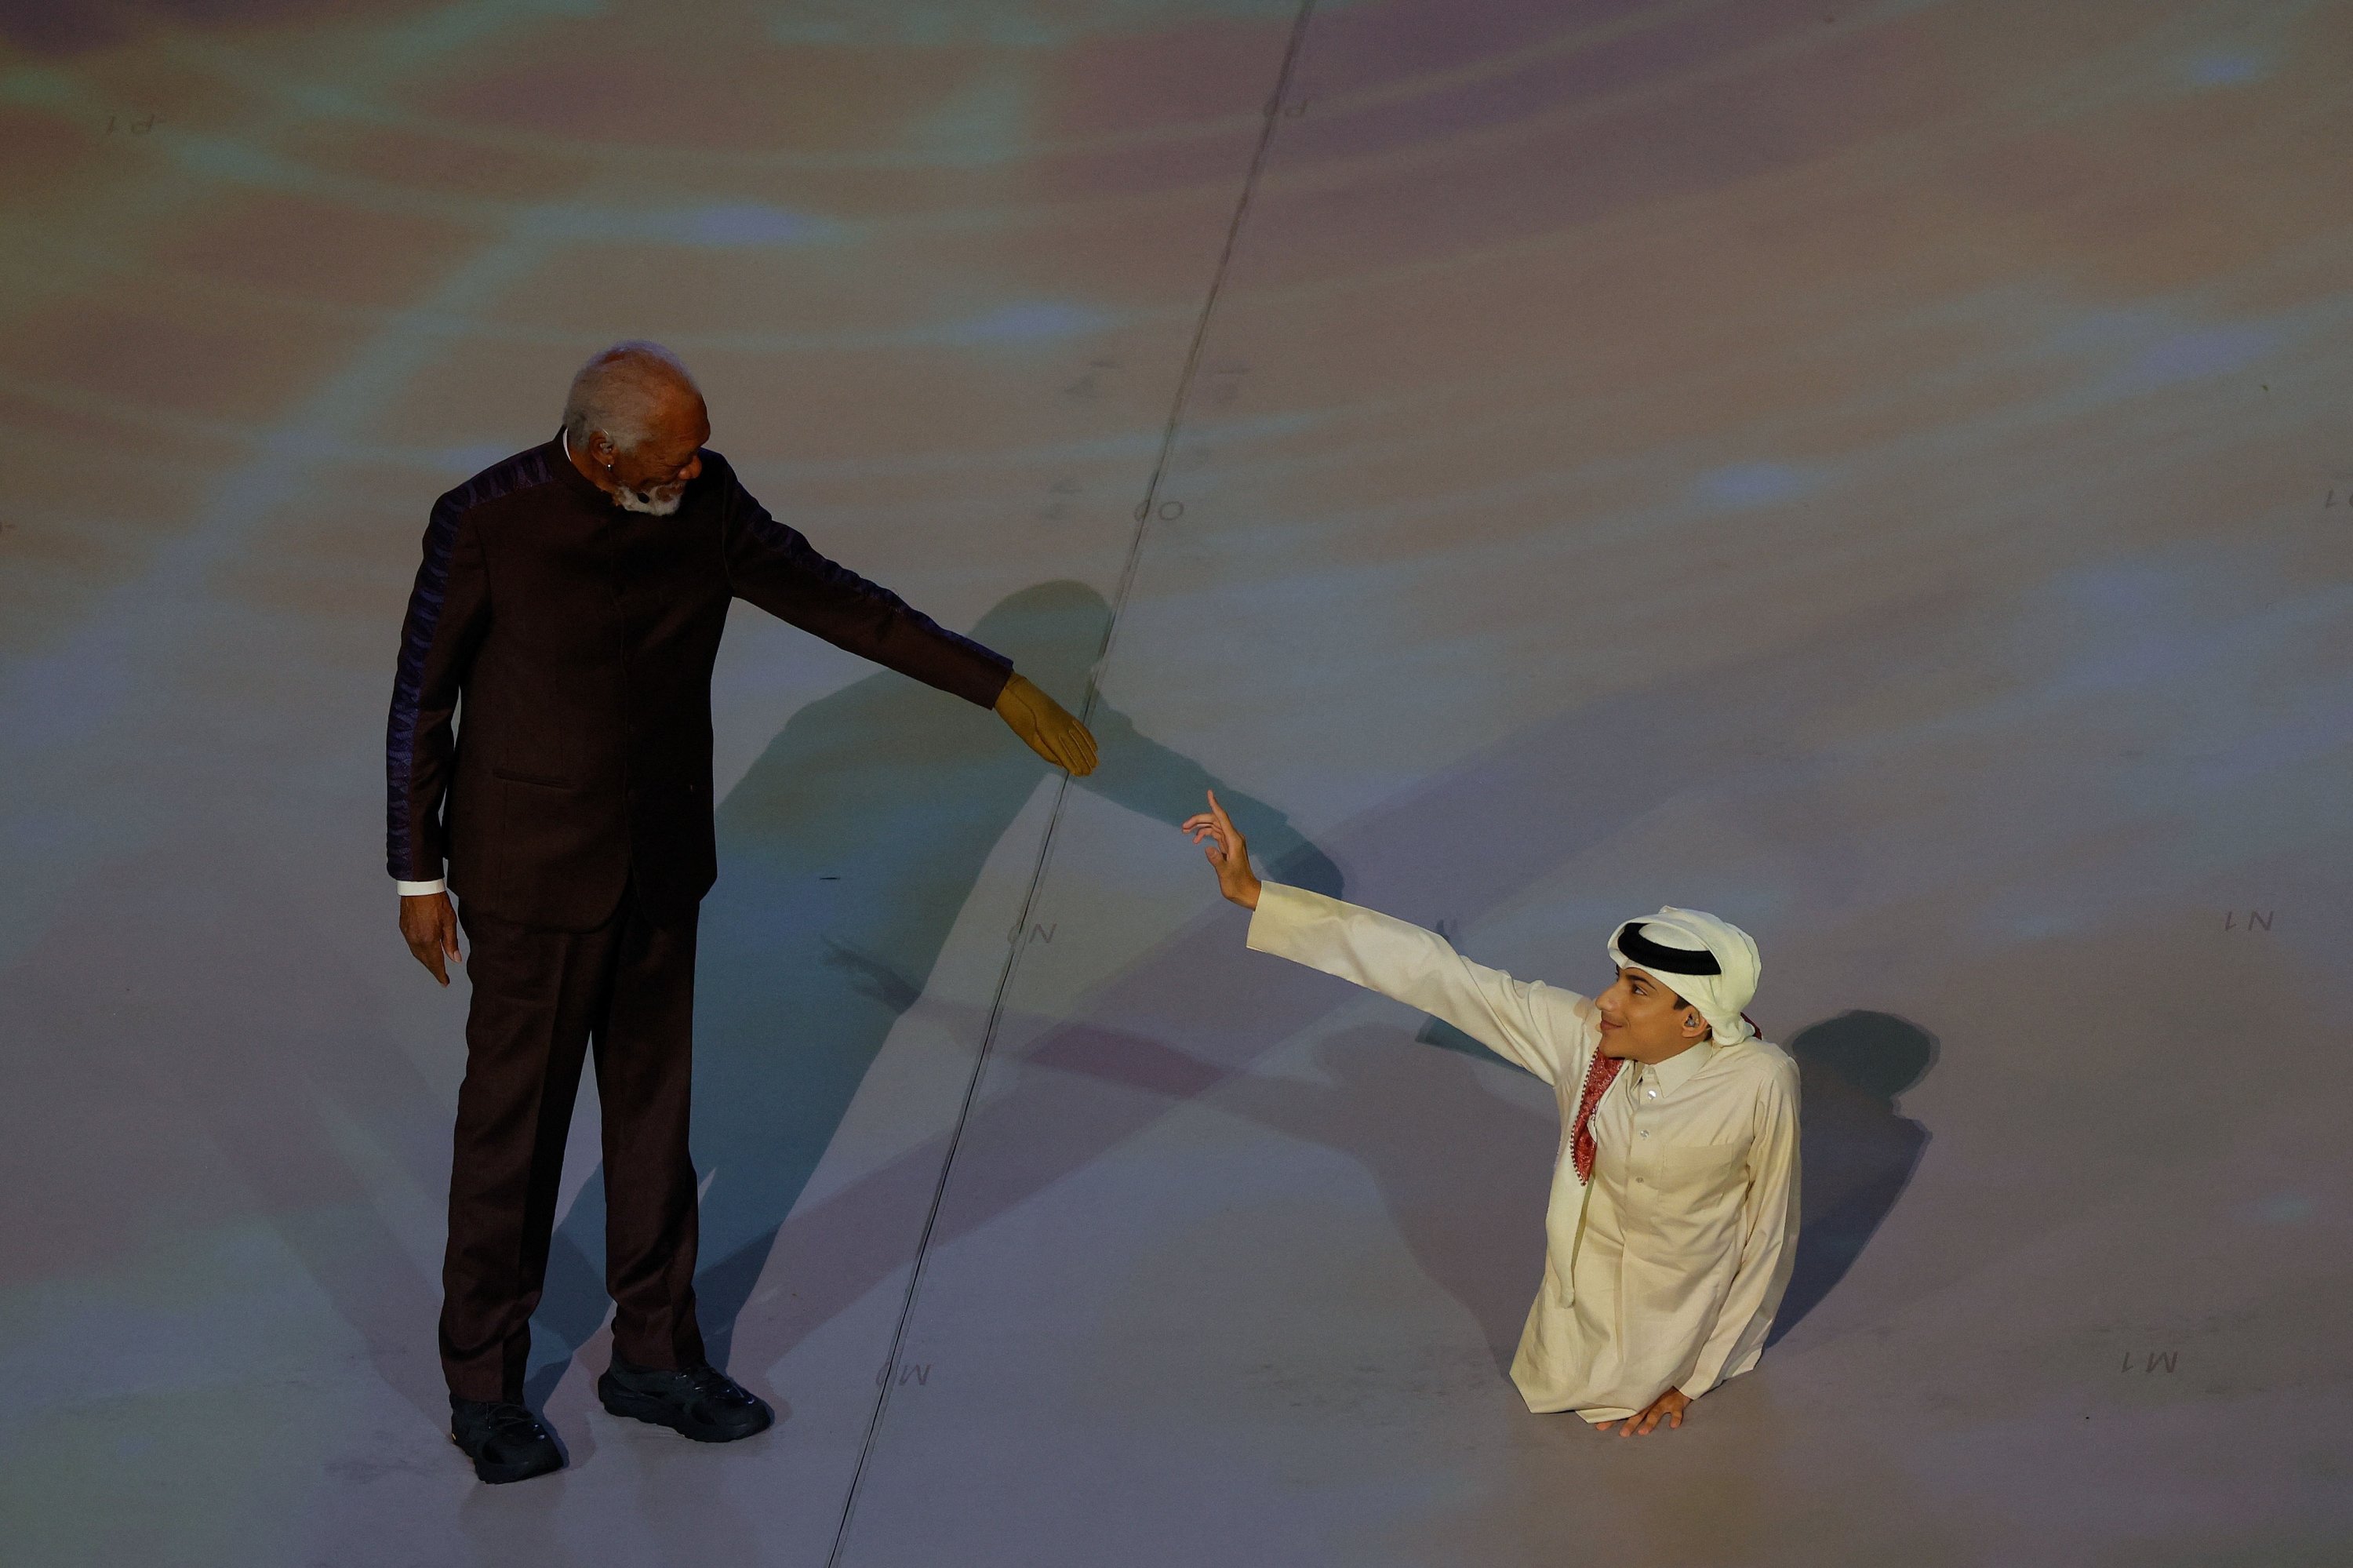 Freeman, Qatar's Al Muftah call for unity at World Cup opening | Daily Sabah